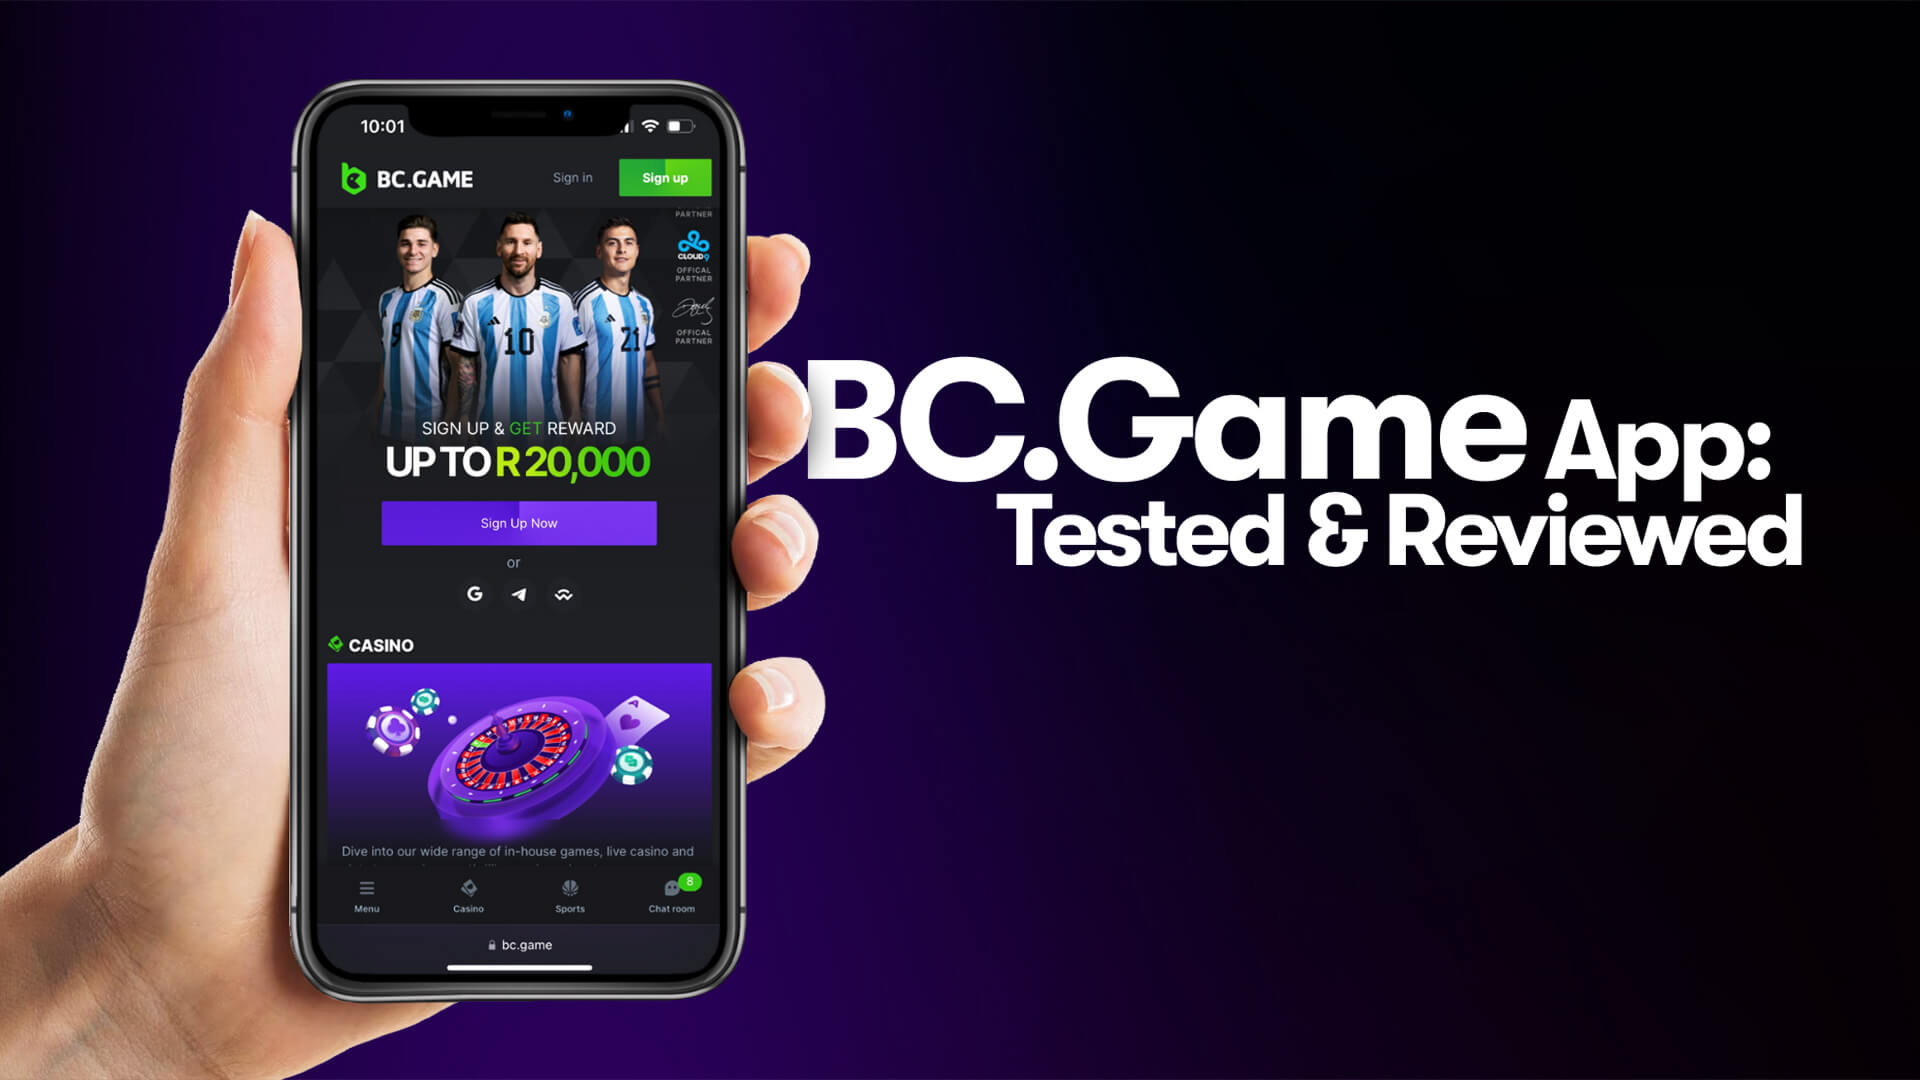 Is There a BC.Game App? Yes - and We Tested It